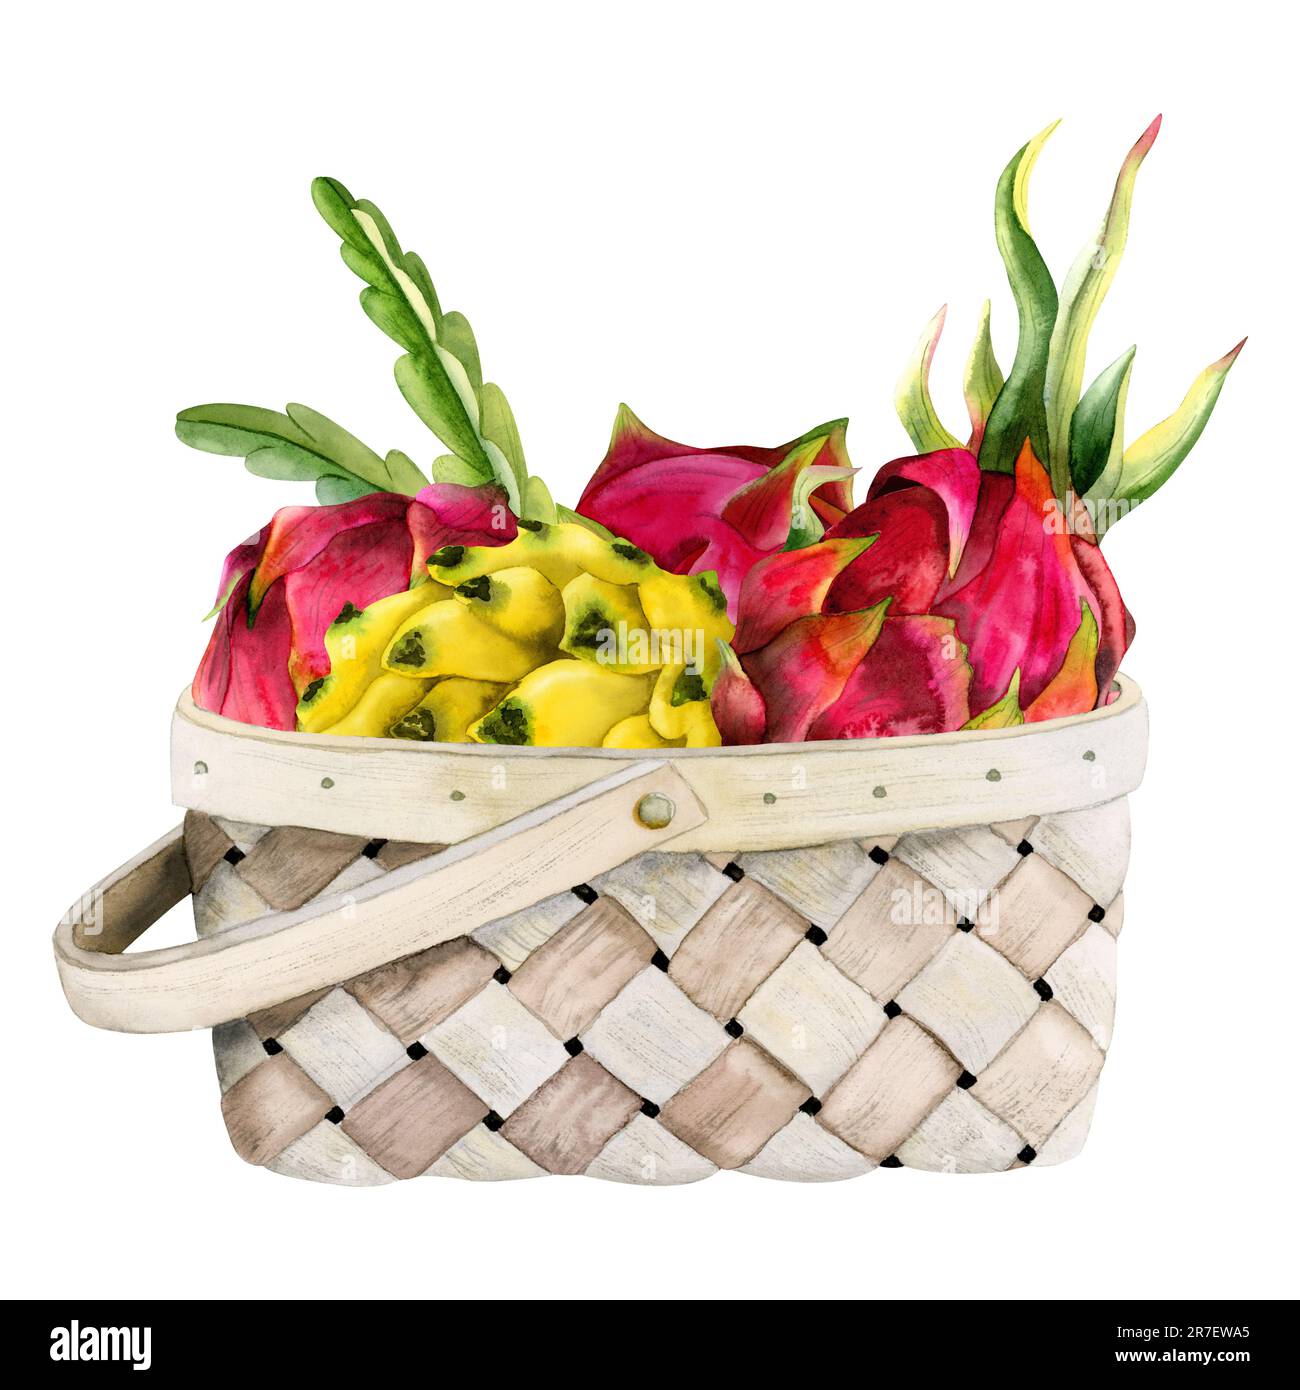 Red pink and yellow dragon fruits with leaves in wicker basket watercolor illustration. Pitaya harvest Stock Photo